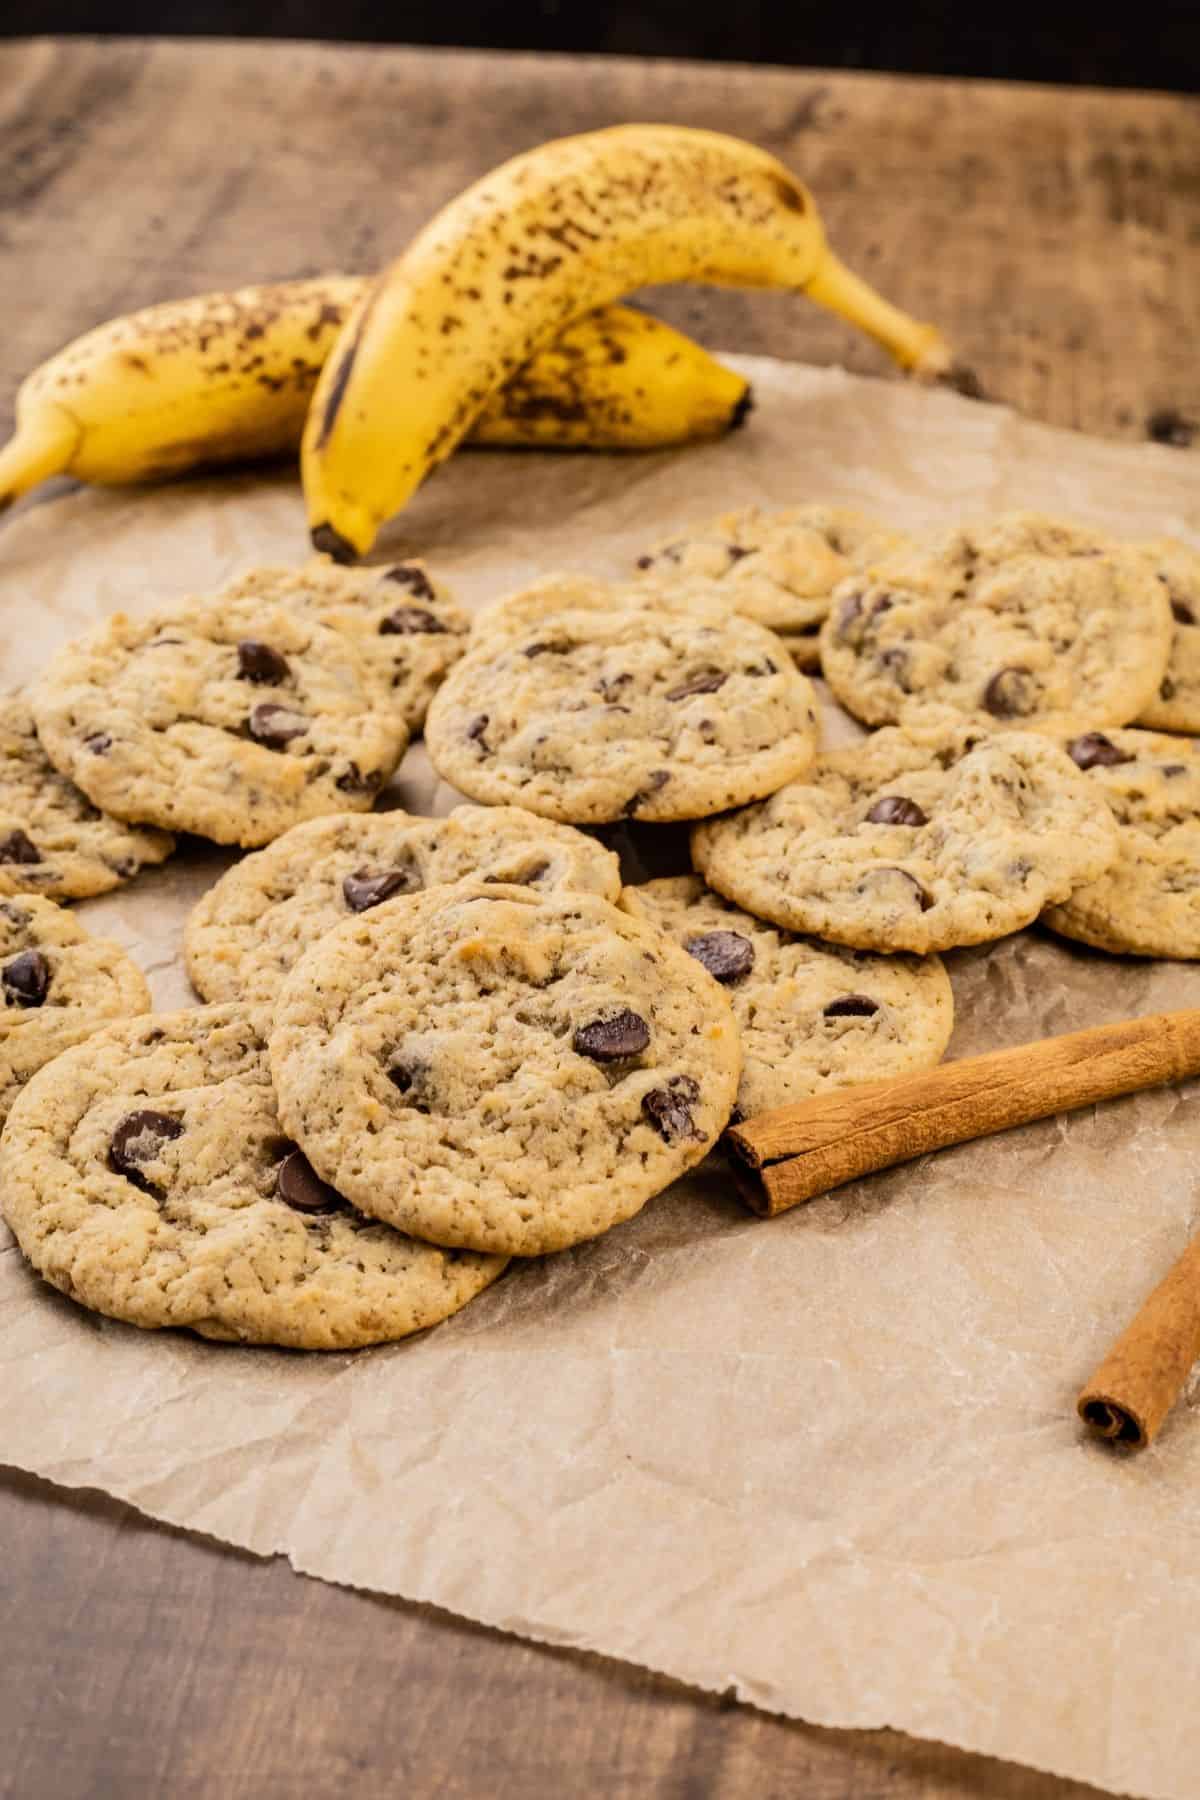 a side view of a pile of many vegan banana chocolate chip cookies with cinnamon sticks and bananas blurred in the background. it is resting on a wood tabletop and you can see just the edge of the table.